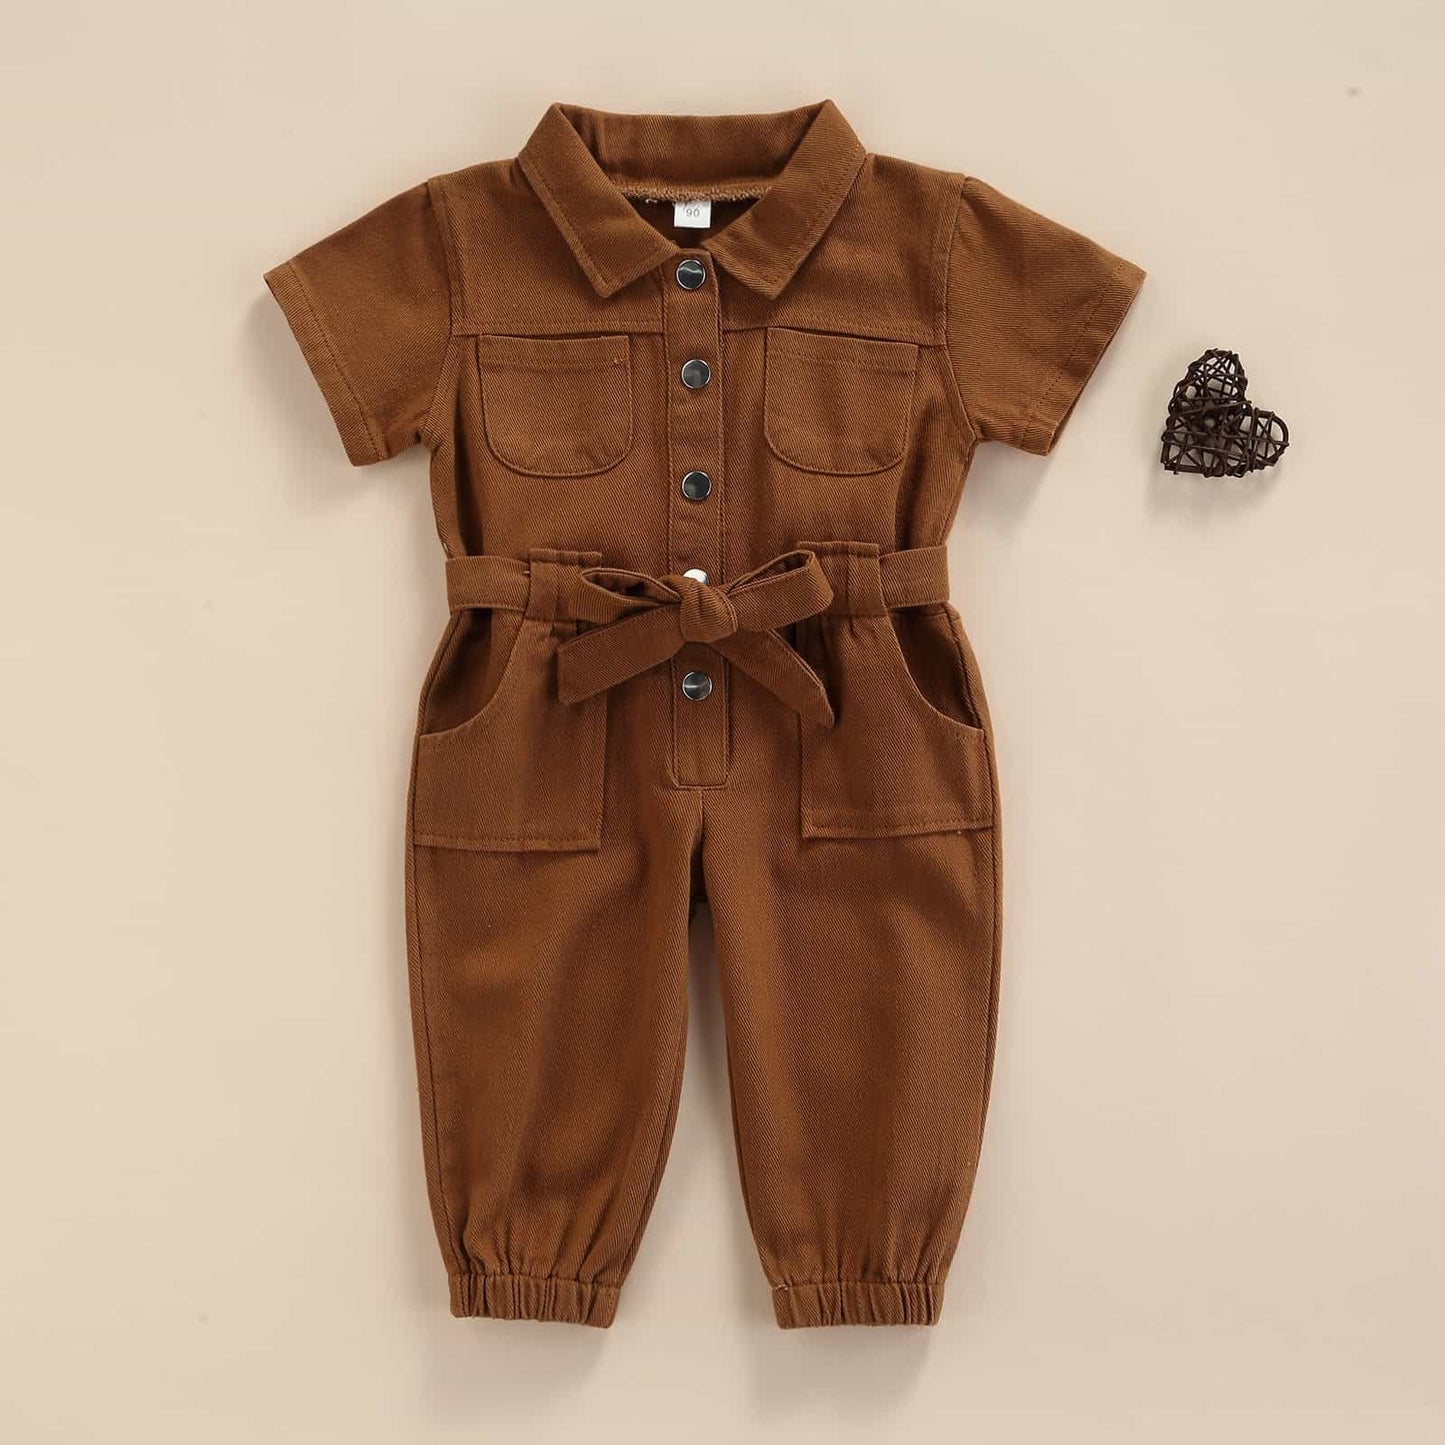 Baby Girl’s Long Sleeve Jumpsuit